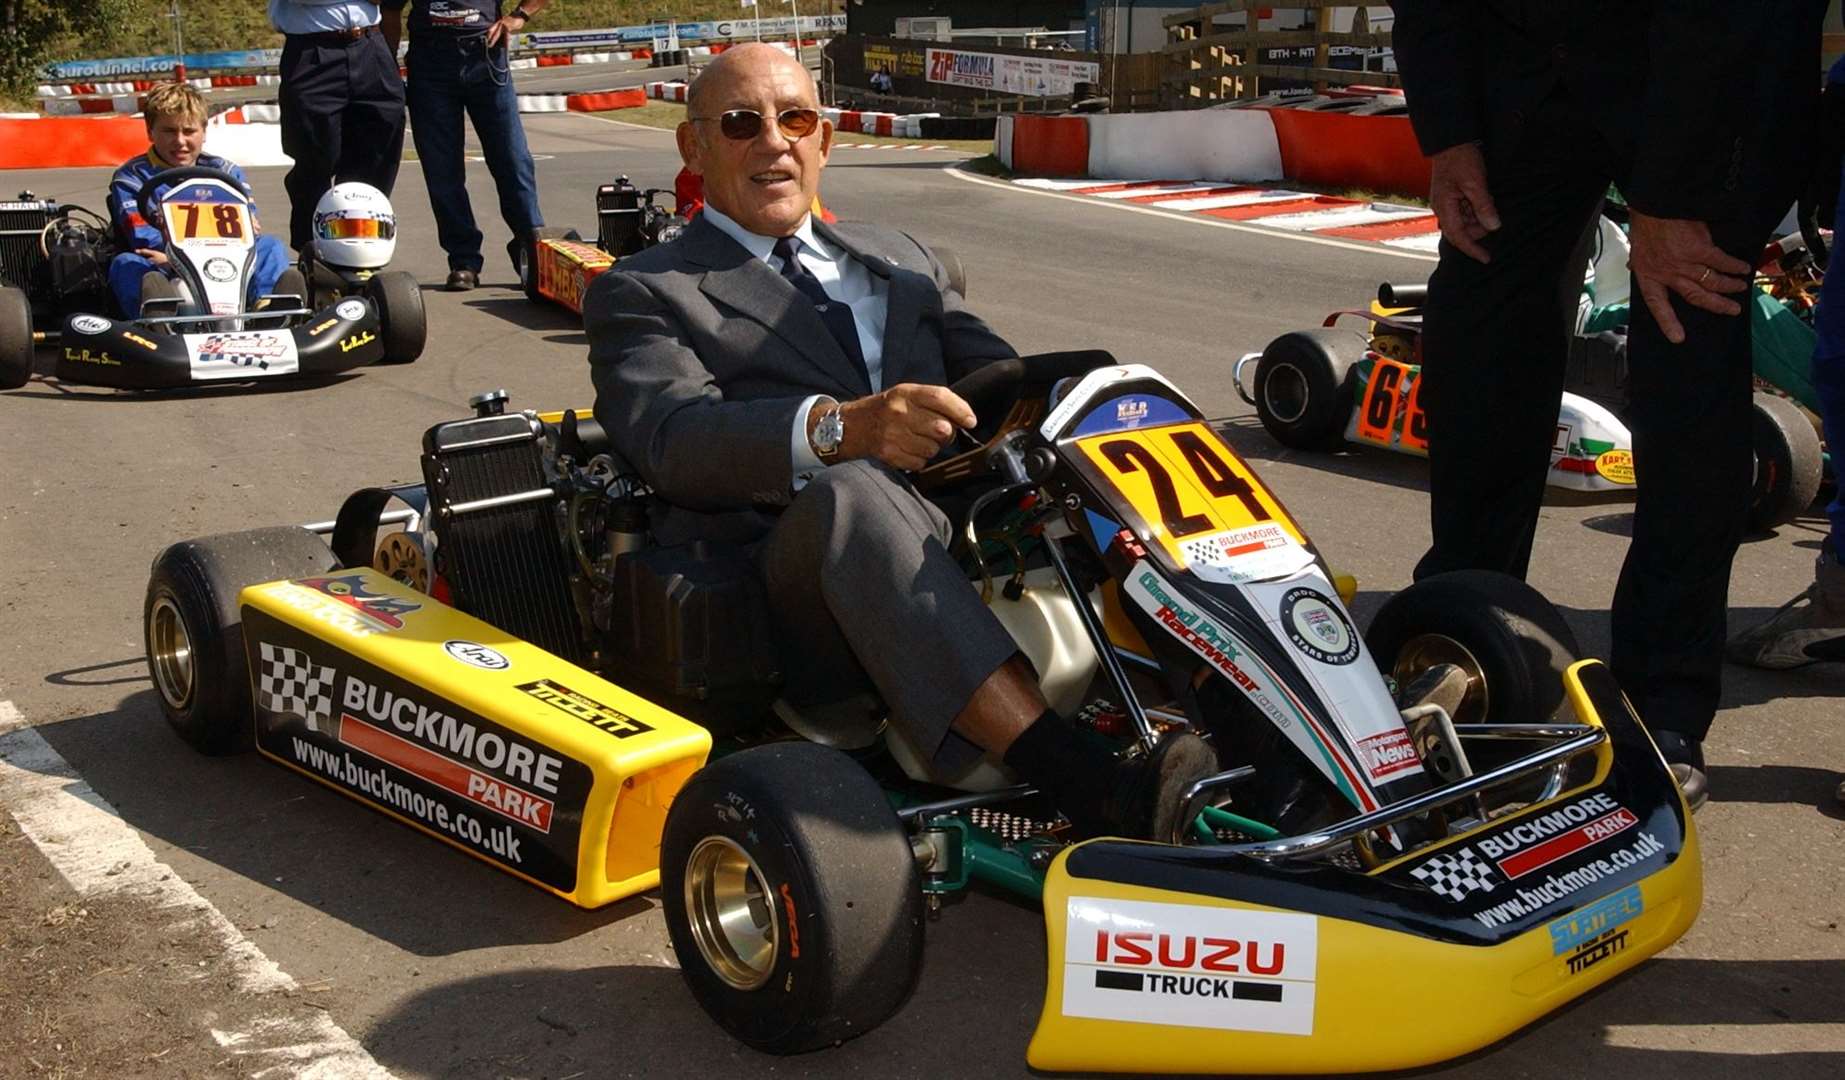 During the opening of Buckmore's clubhouse in 2003, Sir Stirling Moss said if the infrastructure could handle it, he would like to see the British Grand Prix at Brands Hatch. Picture: Jim Rantell